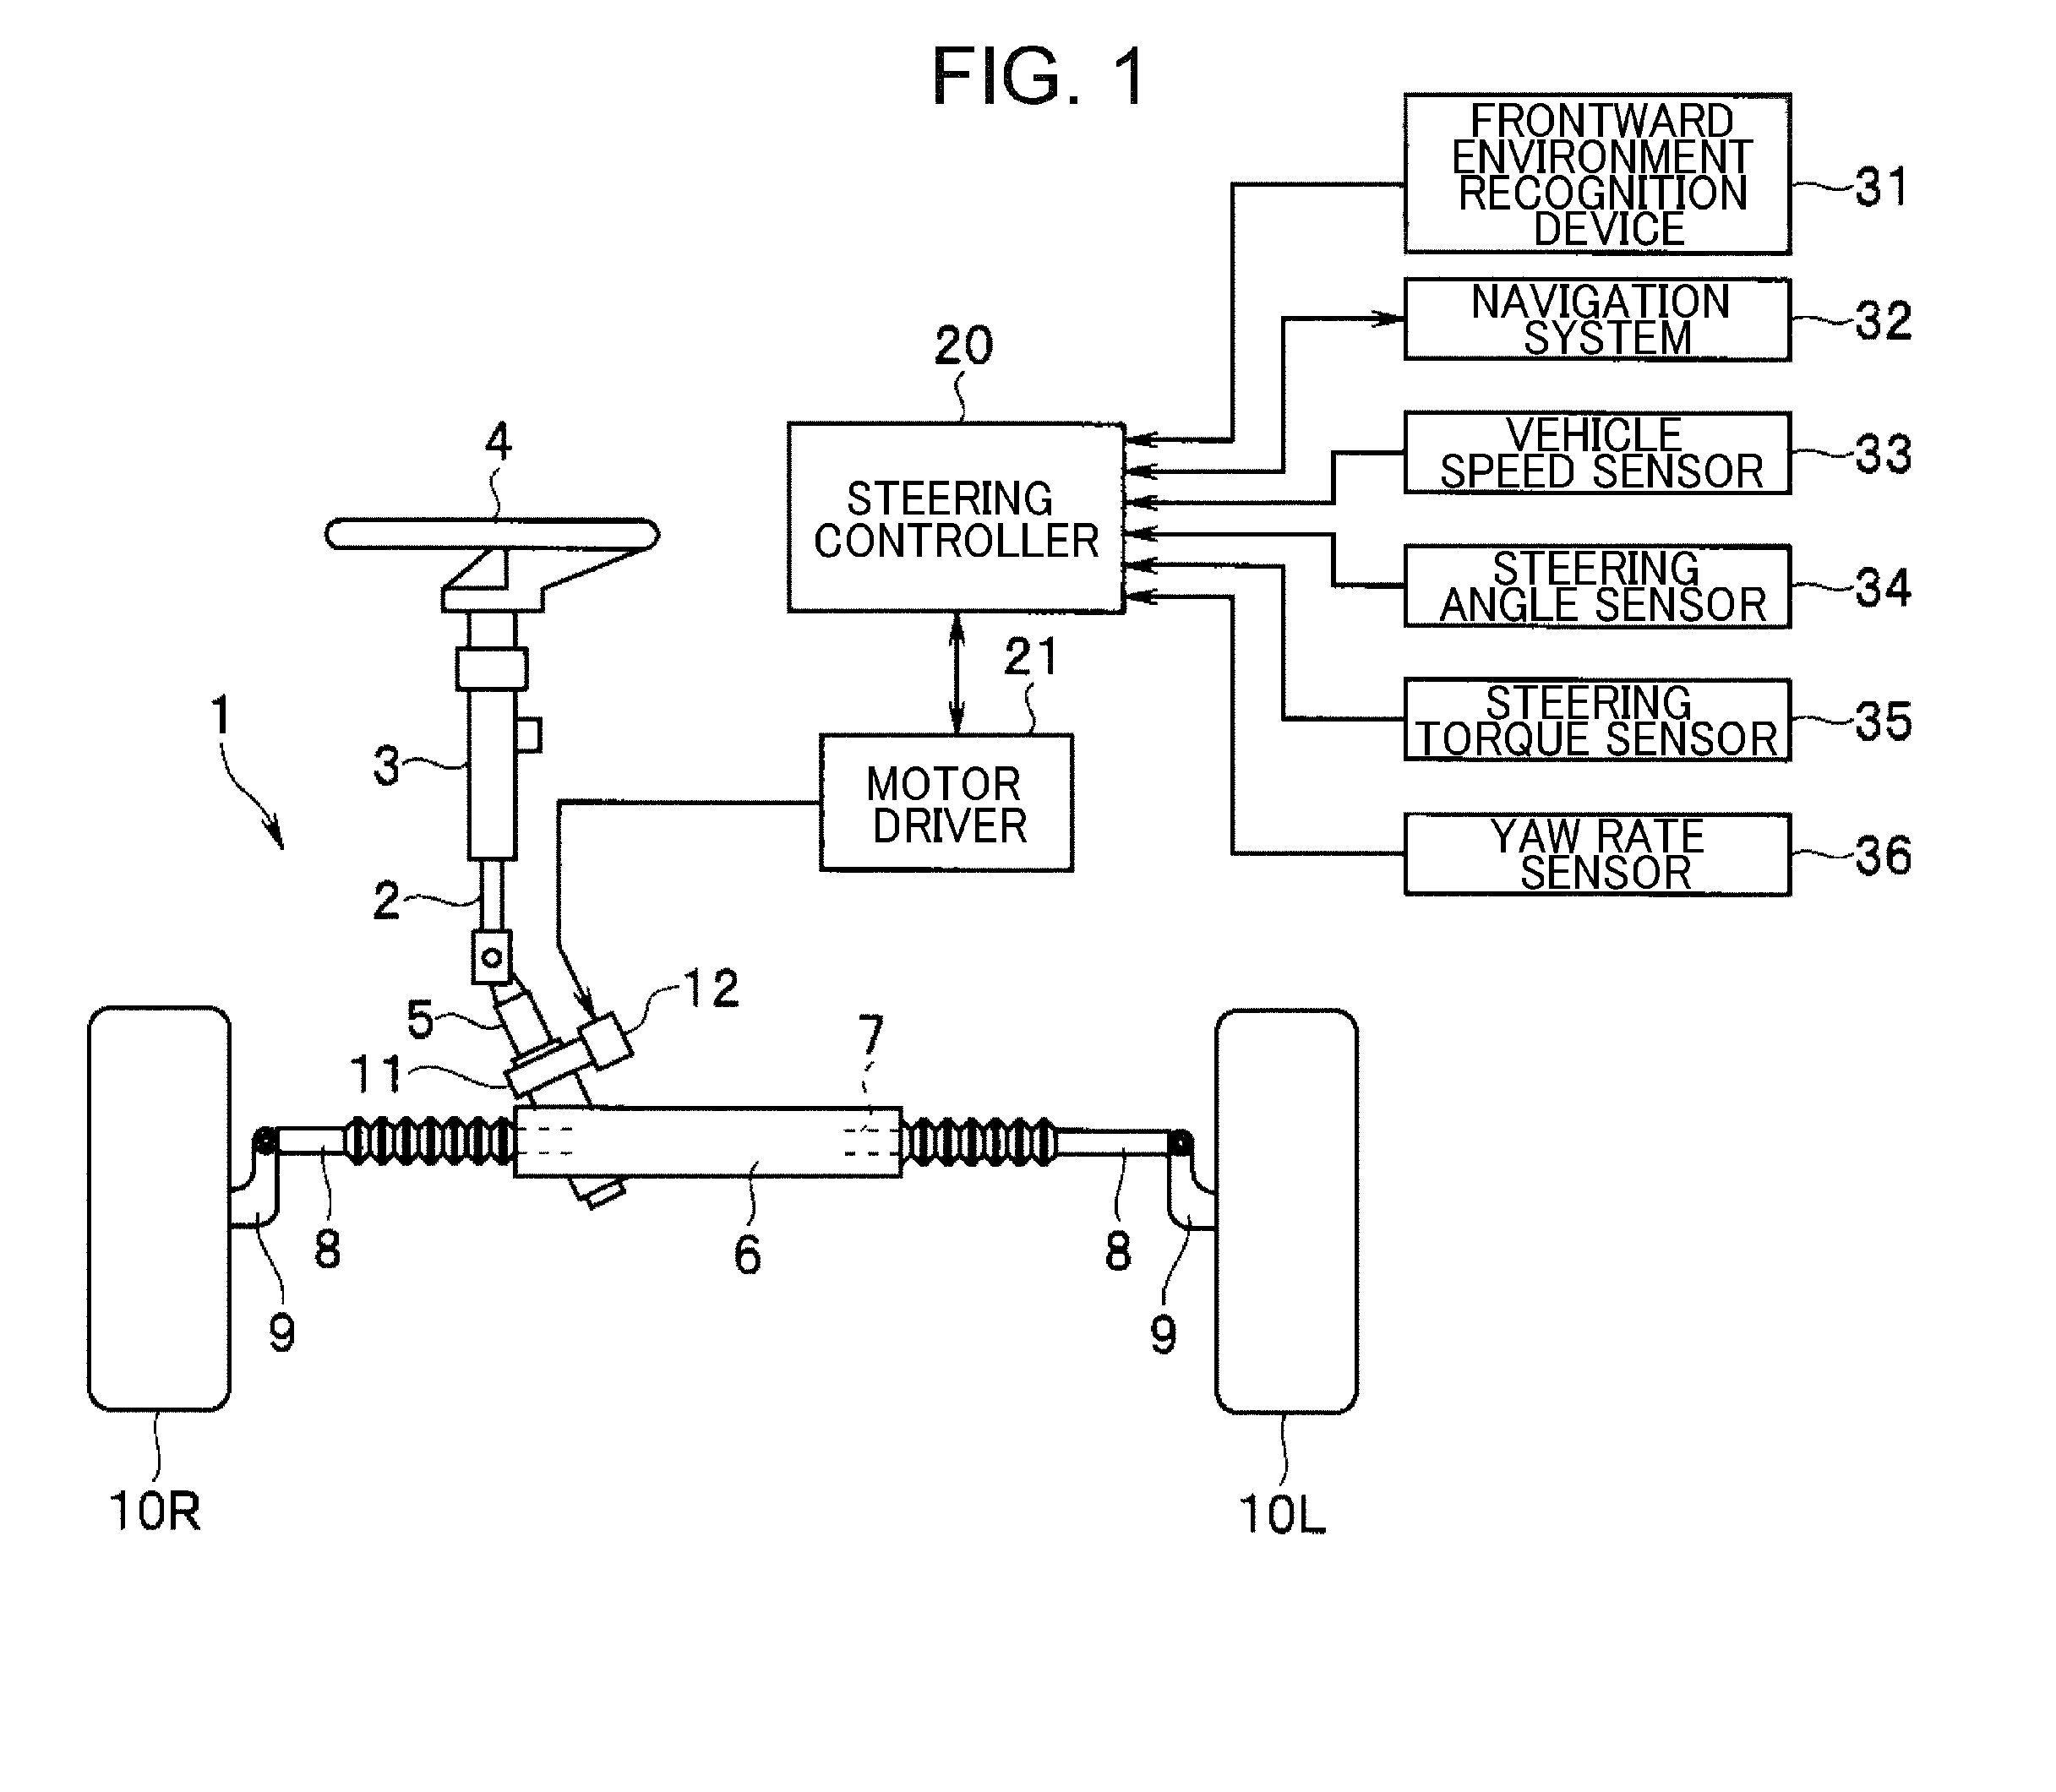 Travel control apparatus for vehicle